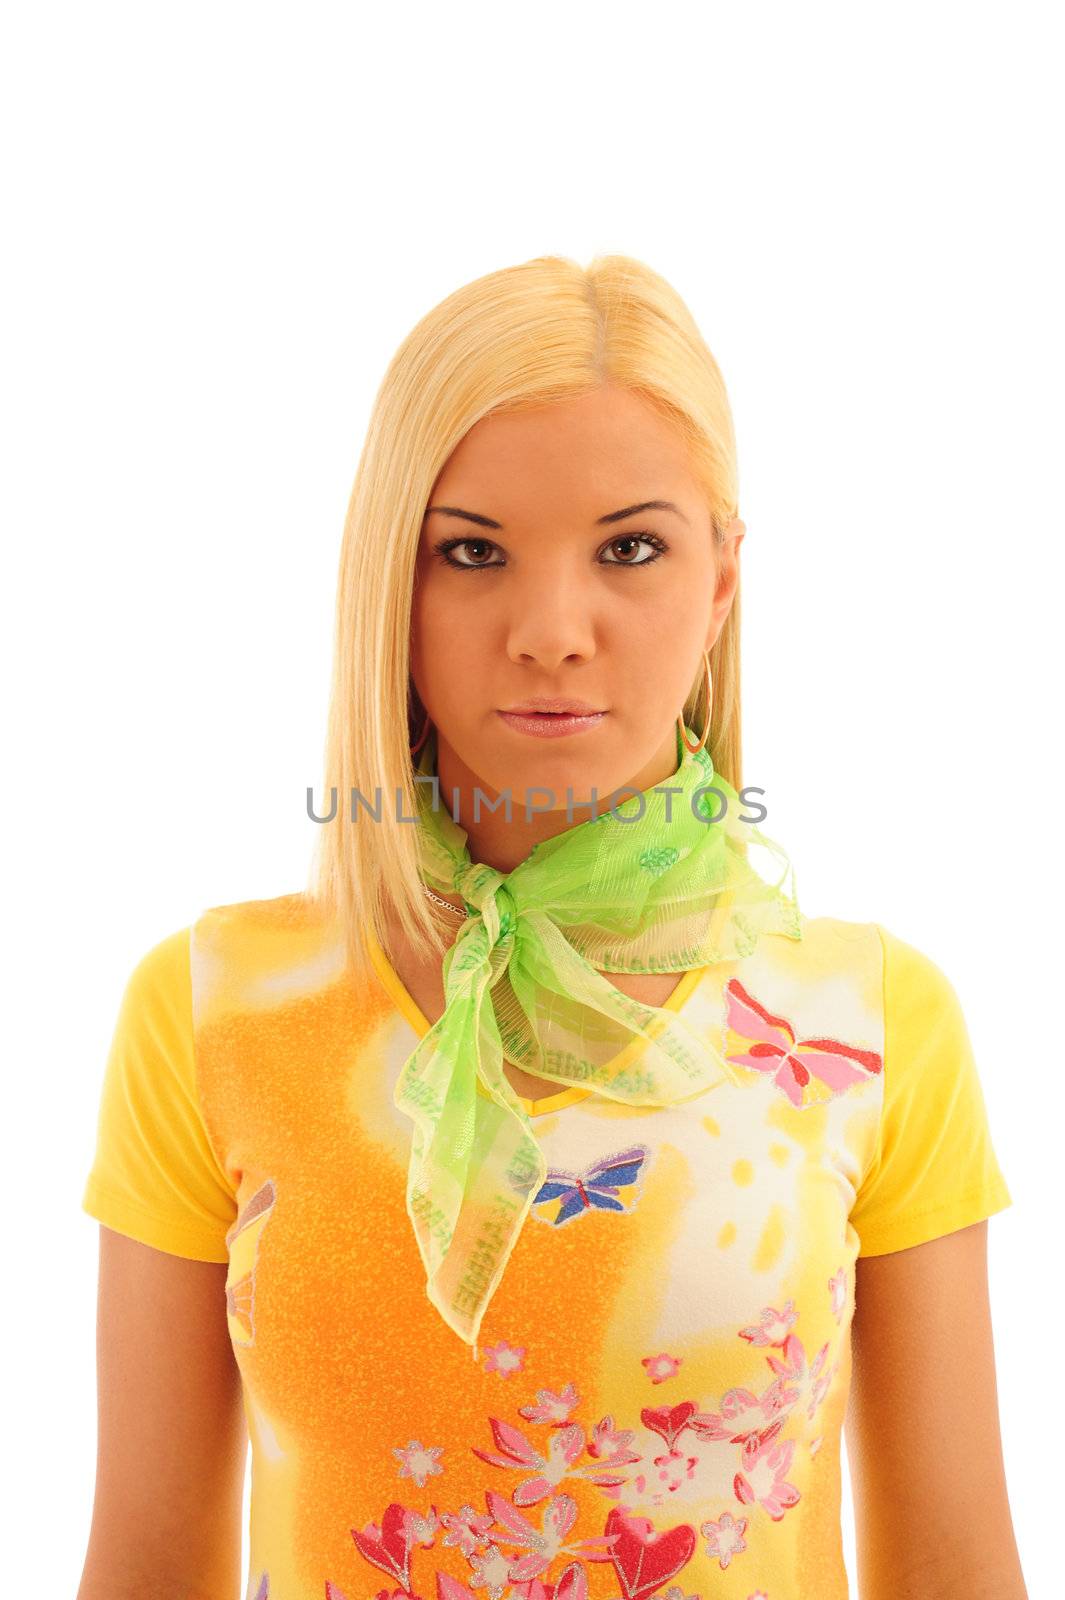 Young confident woman with blonde hair wearing a brightly colored casual outfit on a white background.